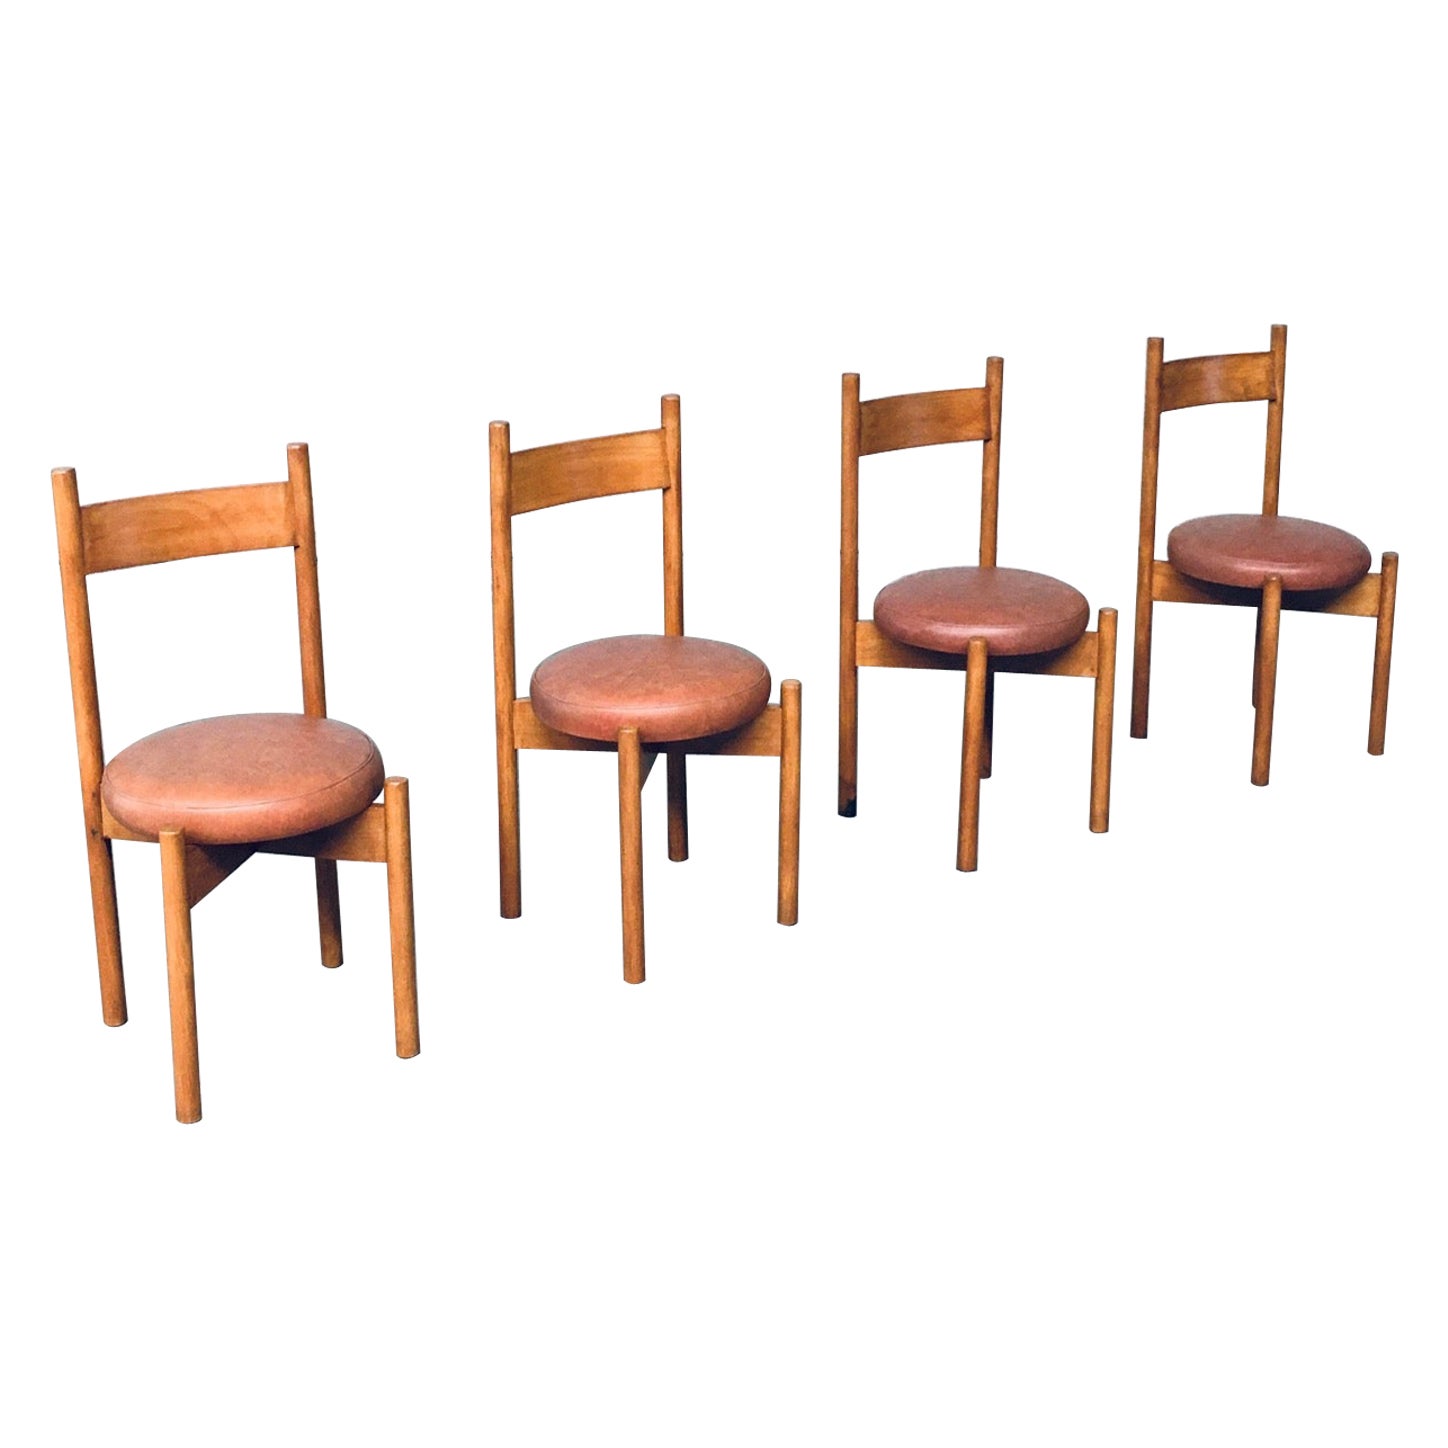 Midcentury Modern Design Dining Chair set in the style of Charlotte Perriand